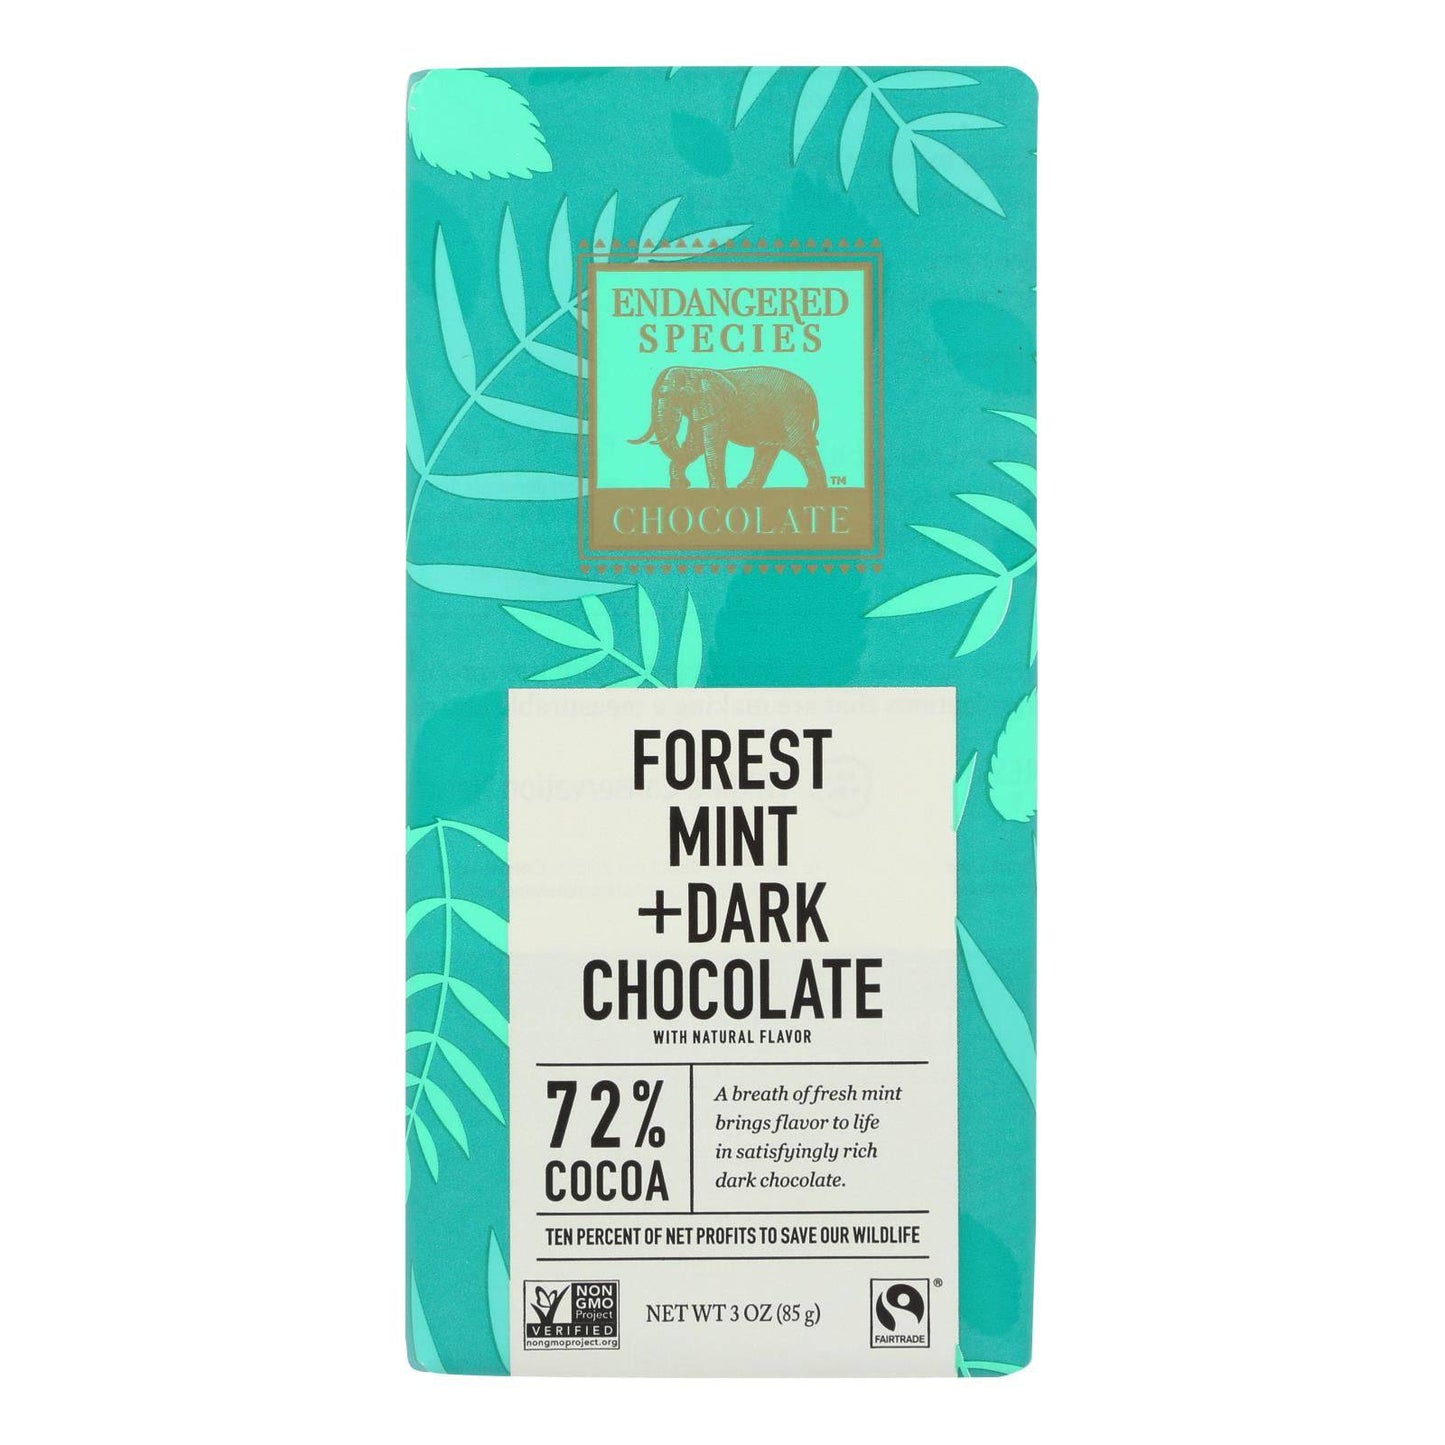 Buy Endangered Species Natural Chocolate Bars - Dark Chocolate - 72 Percent Cocoa - Forest Mint - 3 Oz Bars - Case Of 12  at OnlyNaturals.us